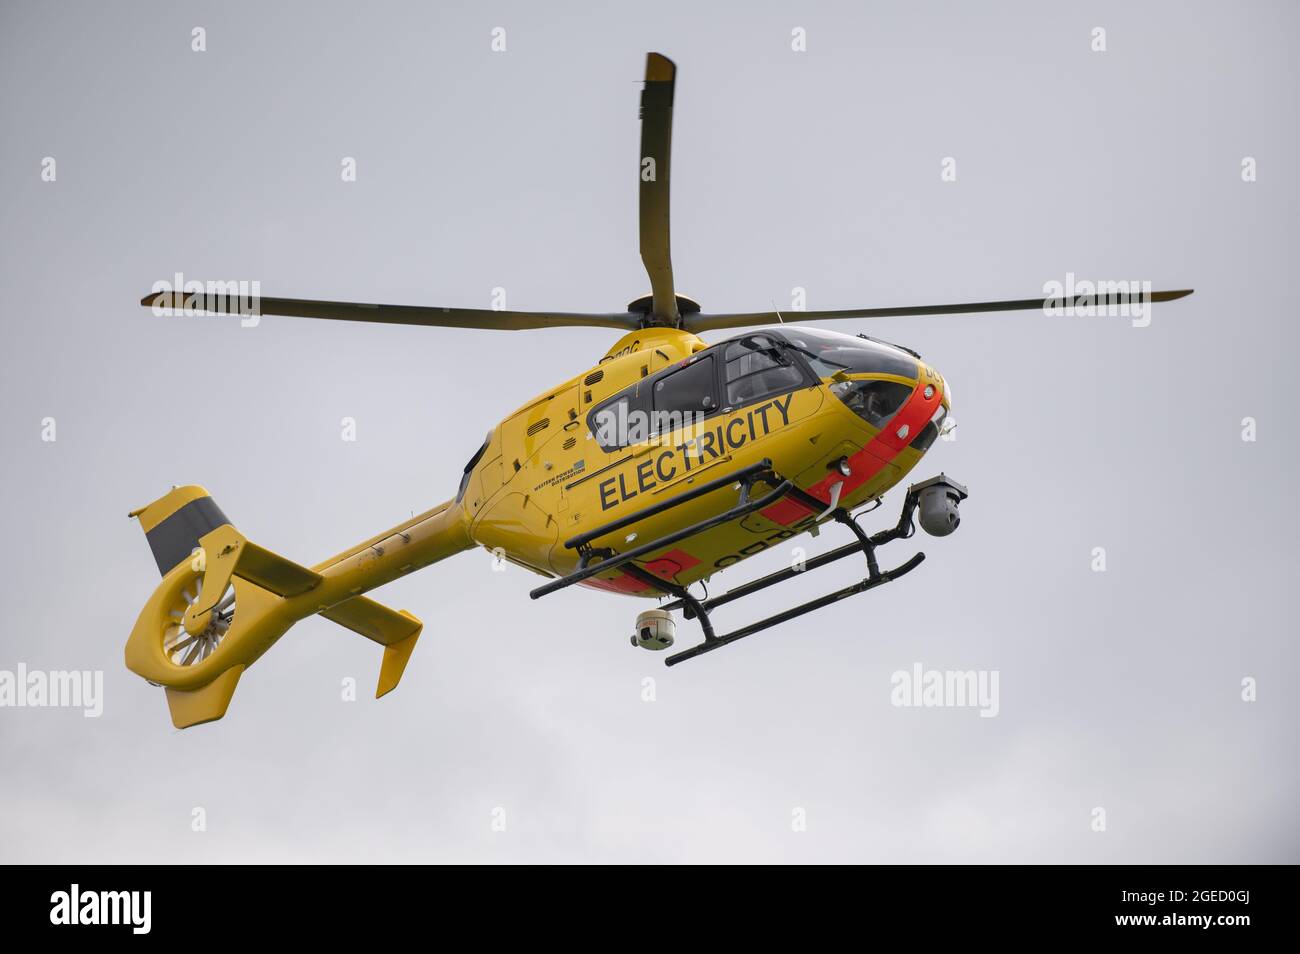 A helicopter run by the UK's National Grid electricity supply making routine inspections over Warwickshire, UK. Stock Photo